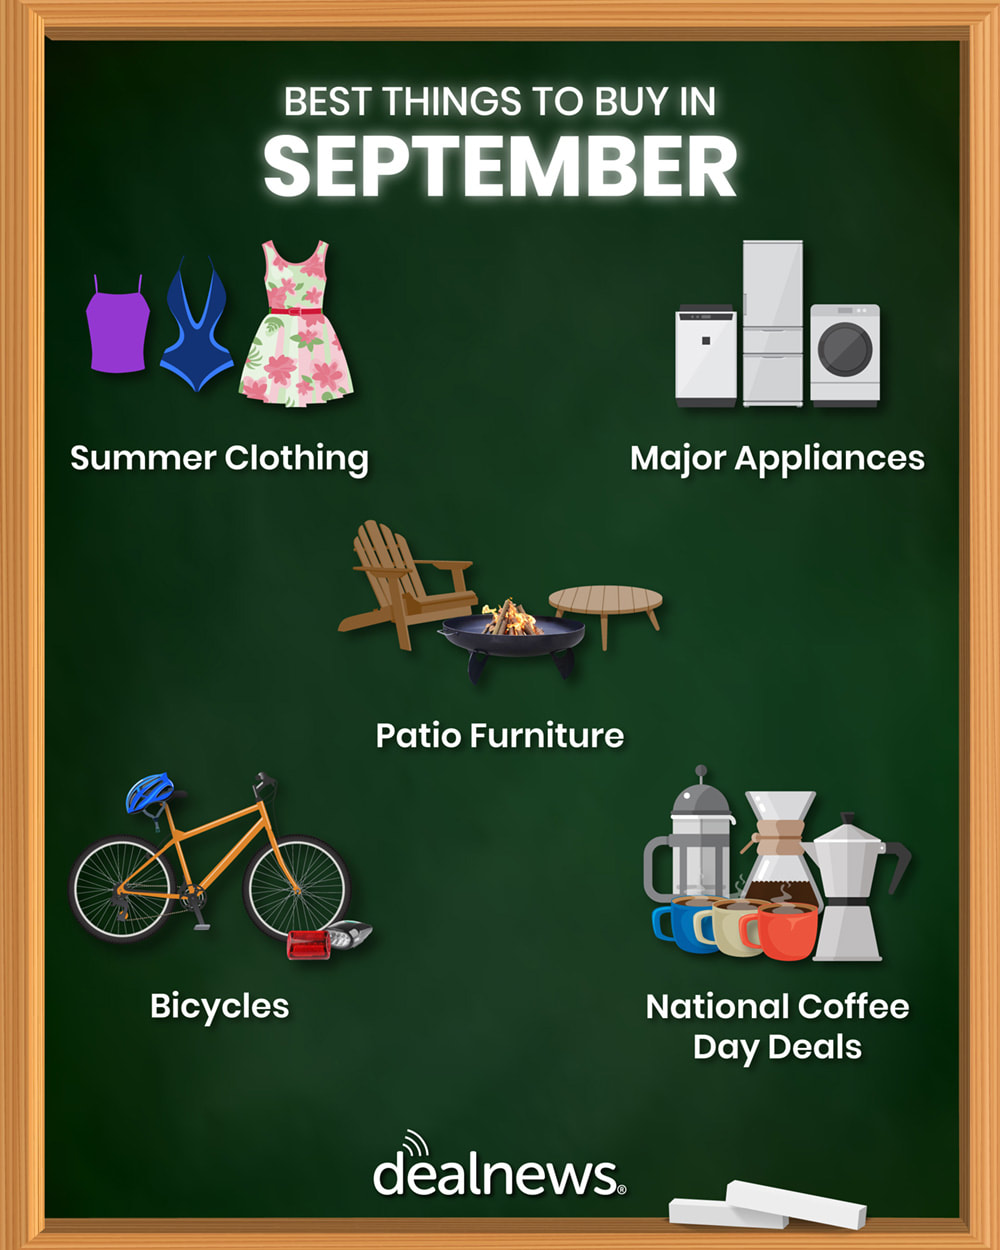 Five of the best things to buy in September are shown in an infographic.